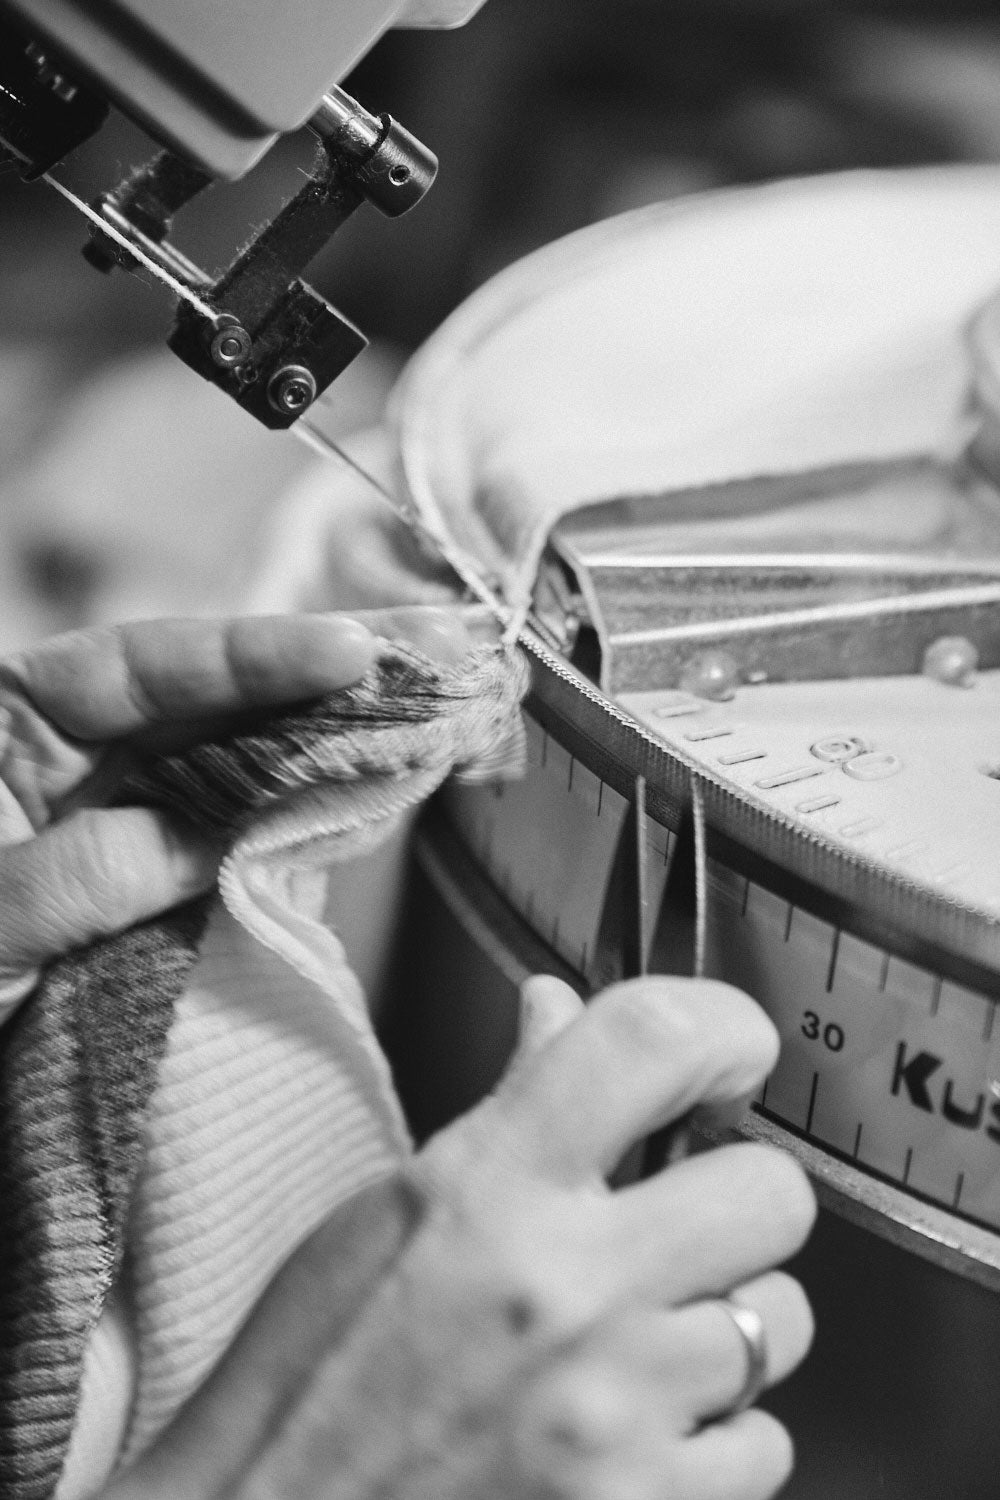 MADE IN SPAIN: Artisan production carried through by a family-owned factory in Toledo